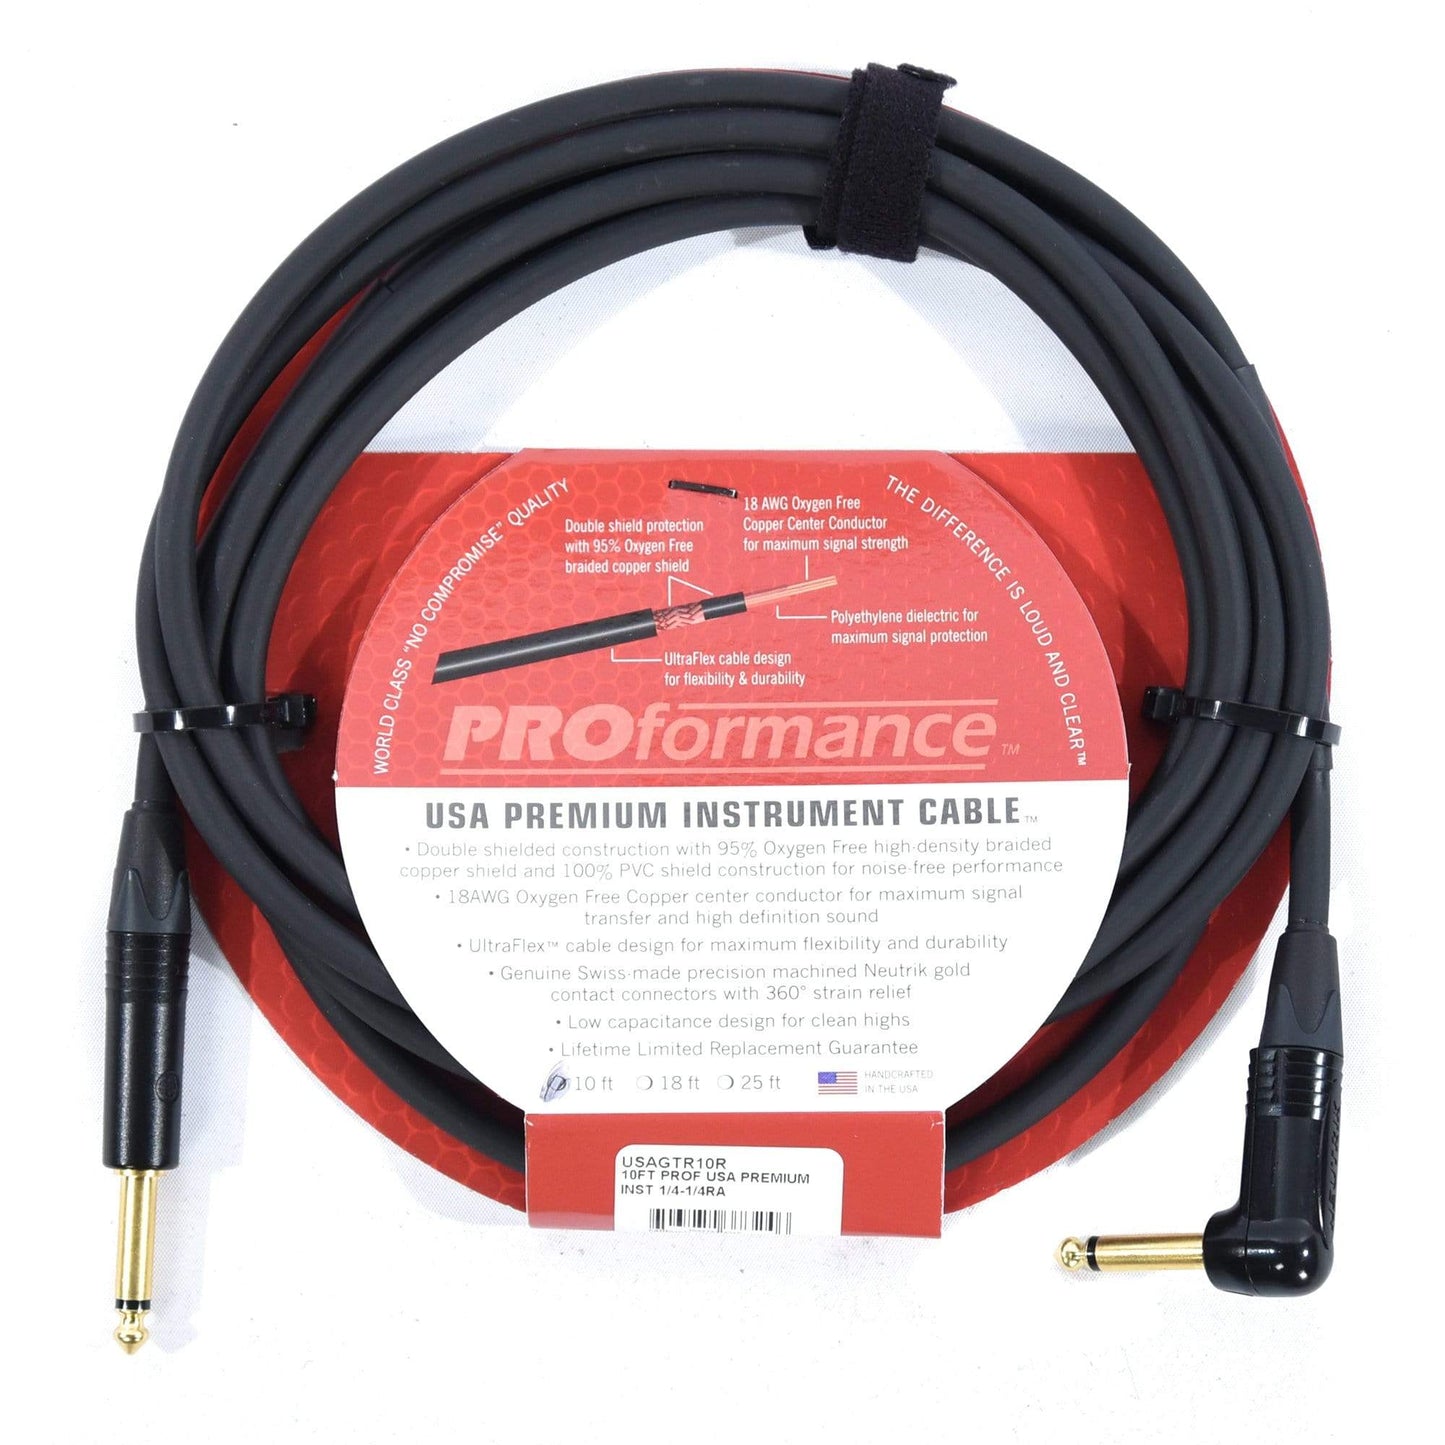 PROformance USA Premium Instrument Cable (Straight- Angle) - 10ft Accessories / Cables